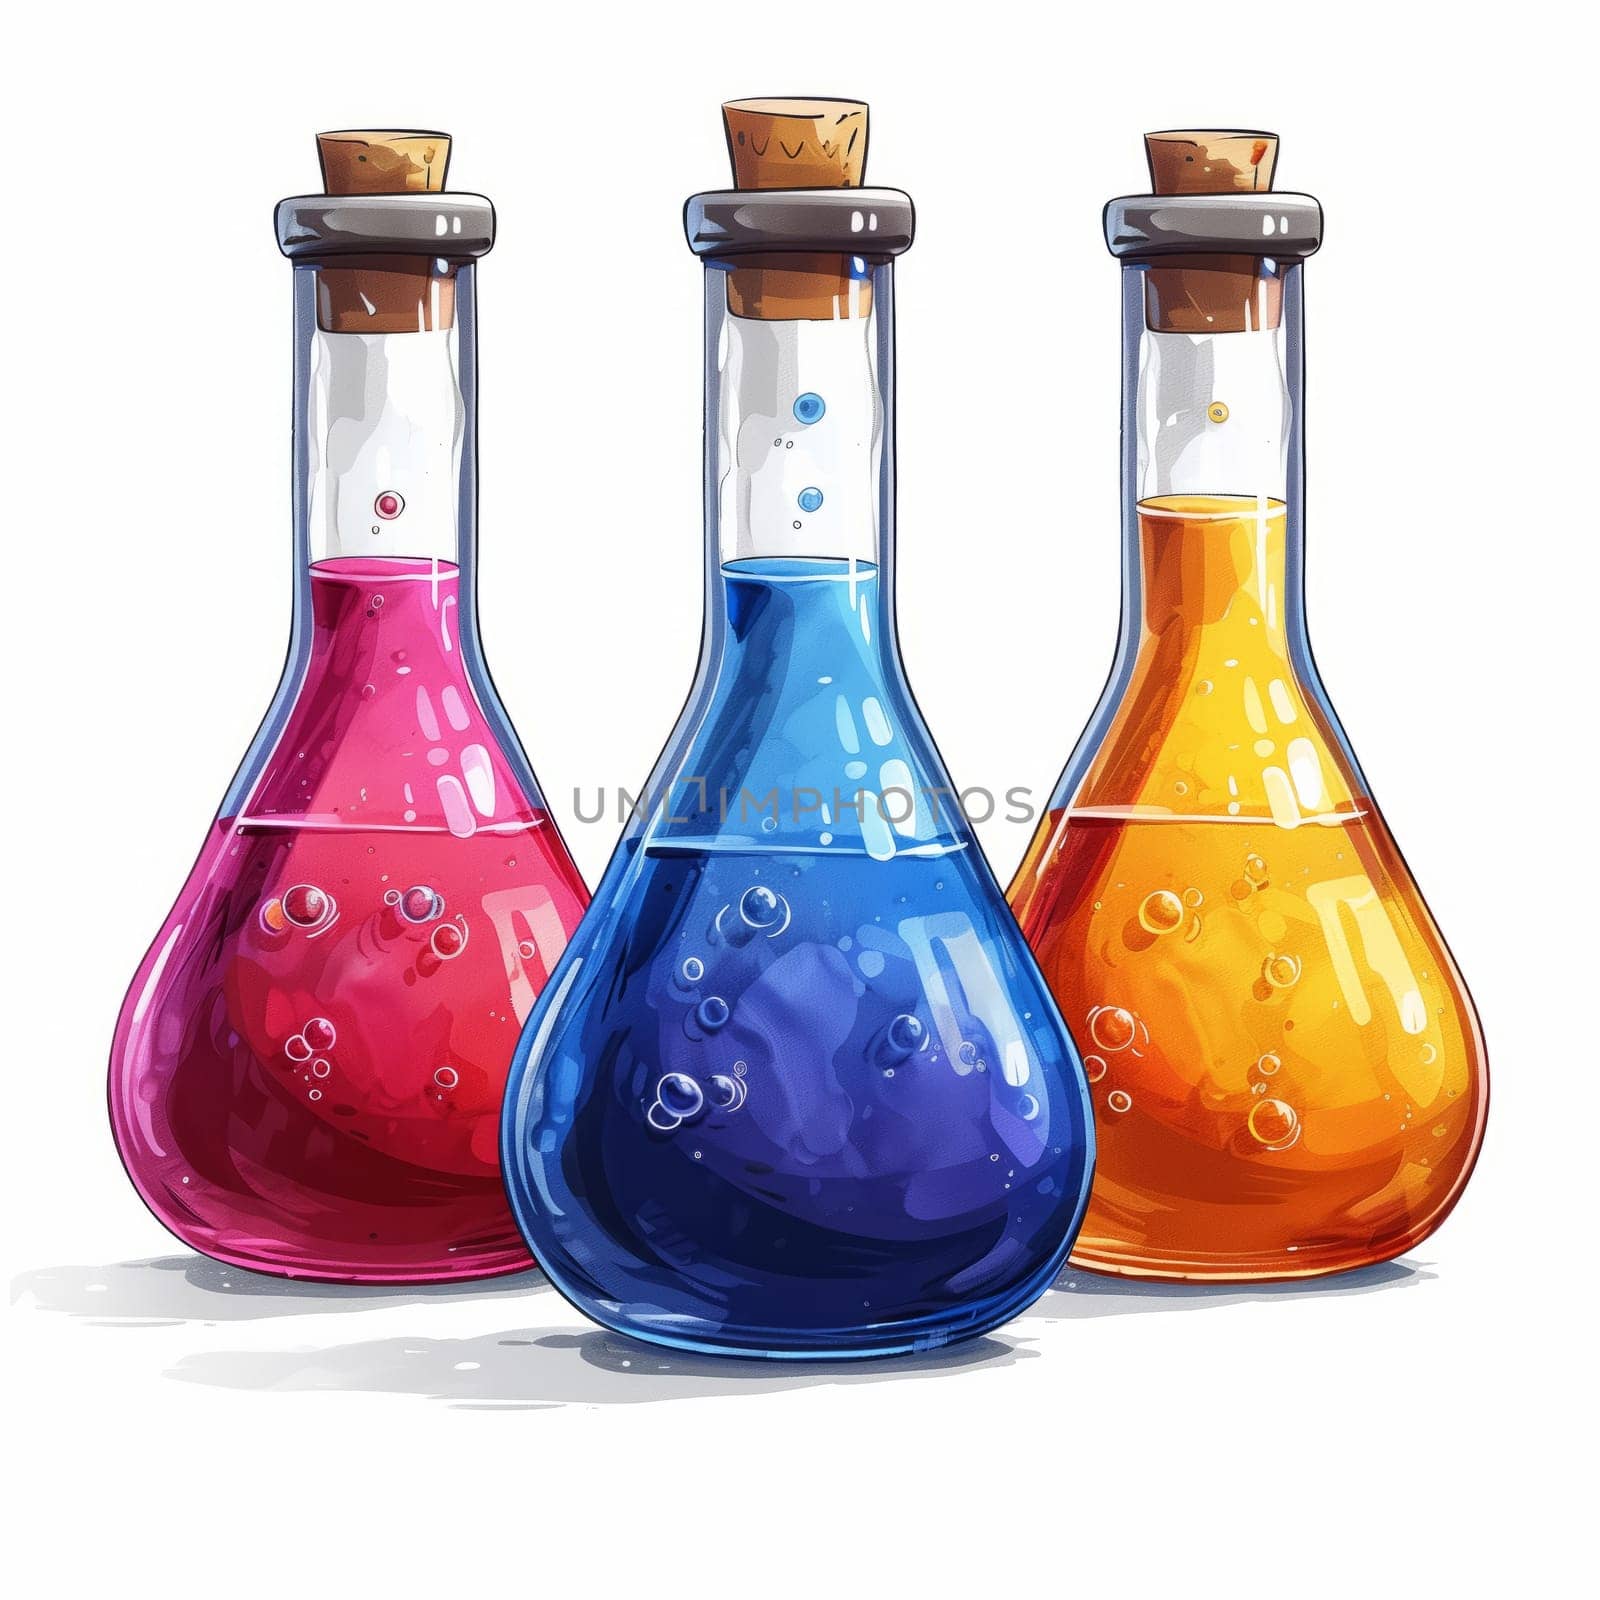 Three glass bottles filled with various colored liquids displayed on a white background, resembling an artistic creation or vibrant drinkware